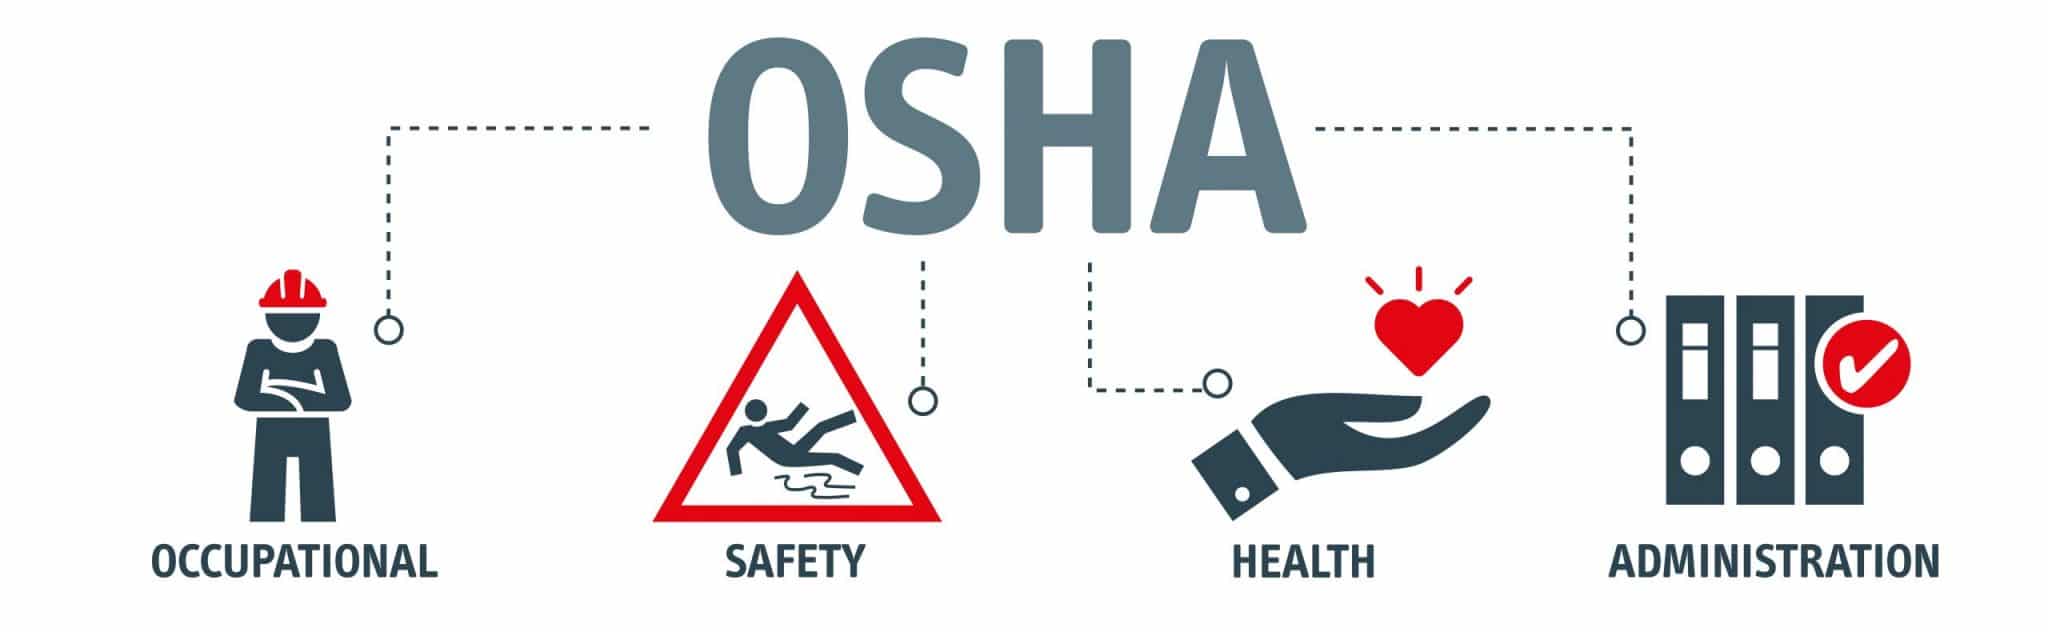 OSHA Poster Guide for Workplace Safety - Law Posters